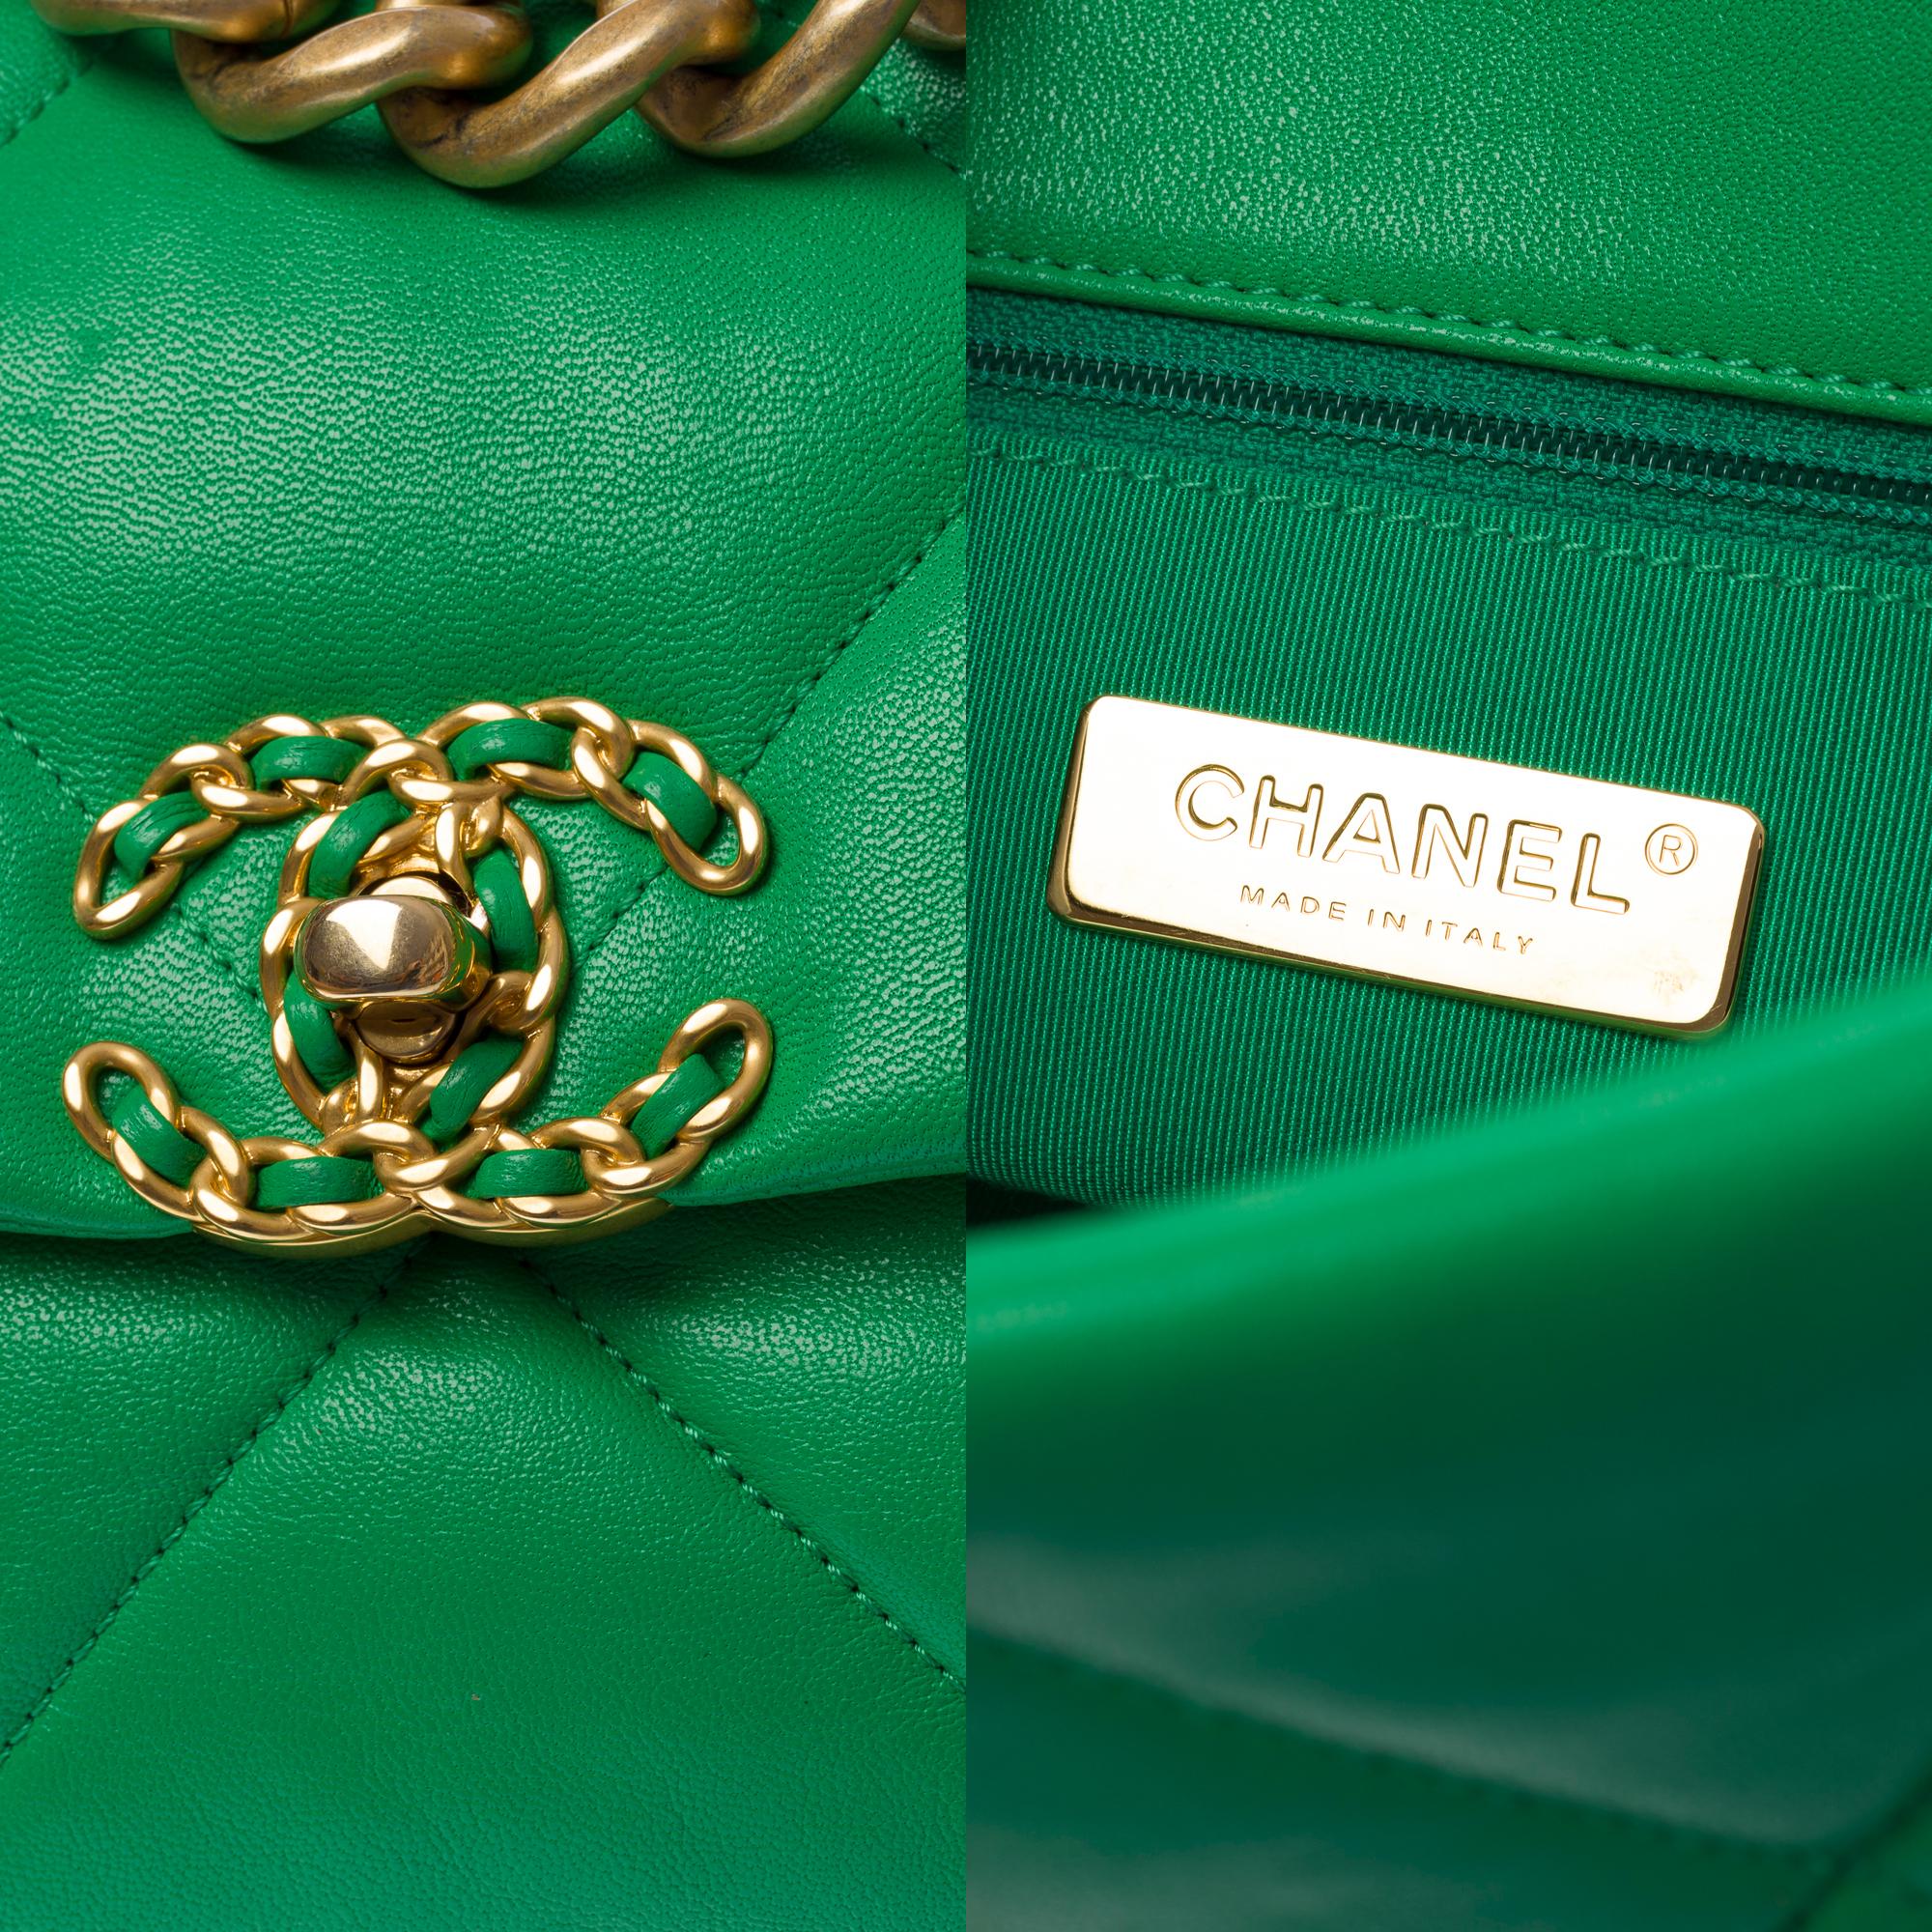 Stunning Chanel 19 shoulder bag in Green quilted leather , Matt gold and SHW 1